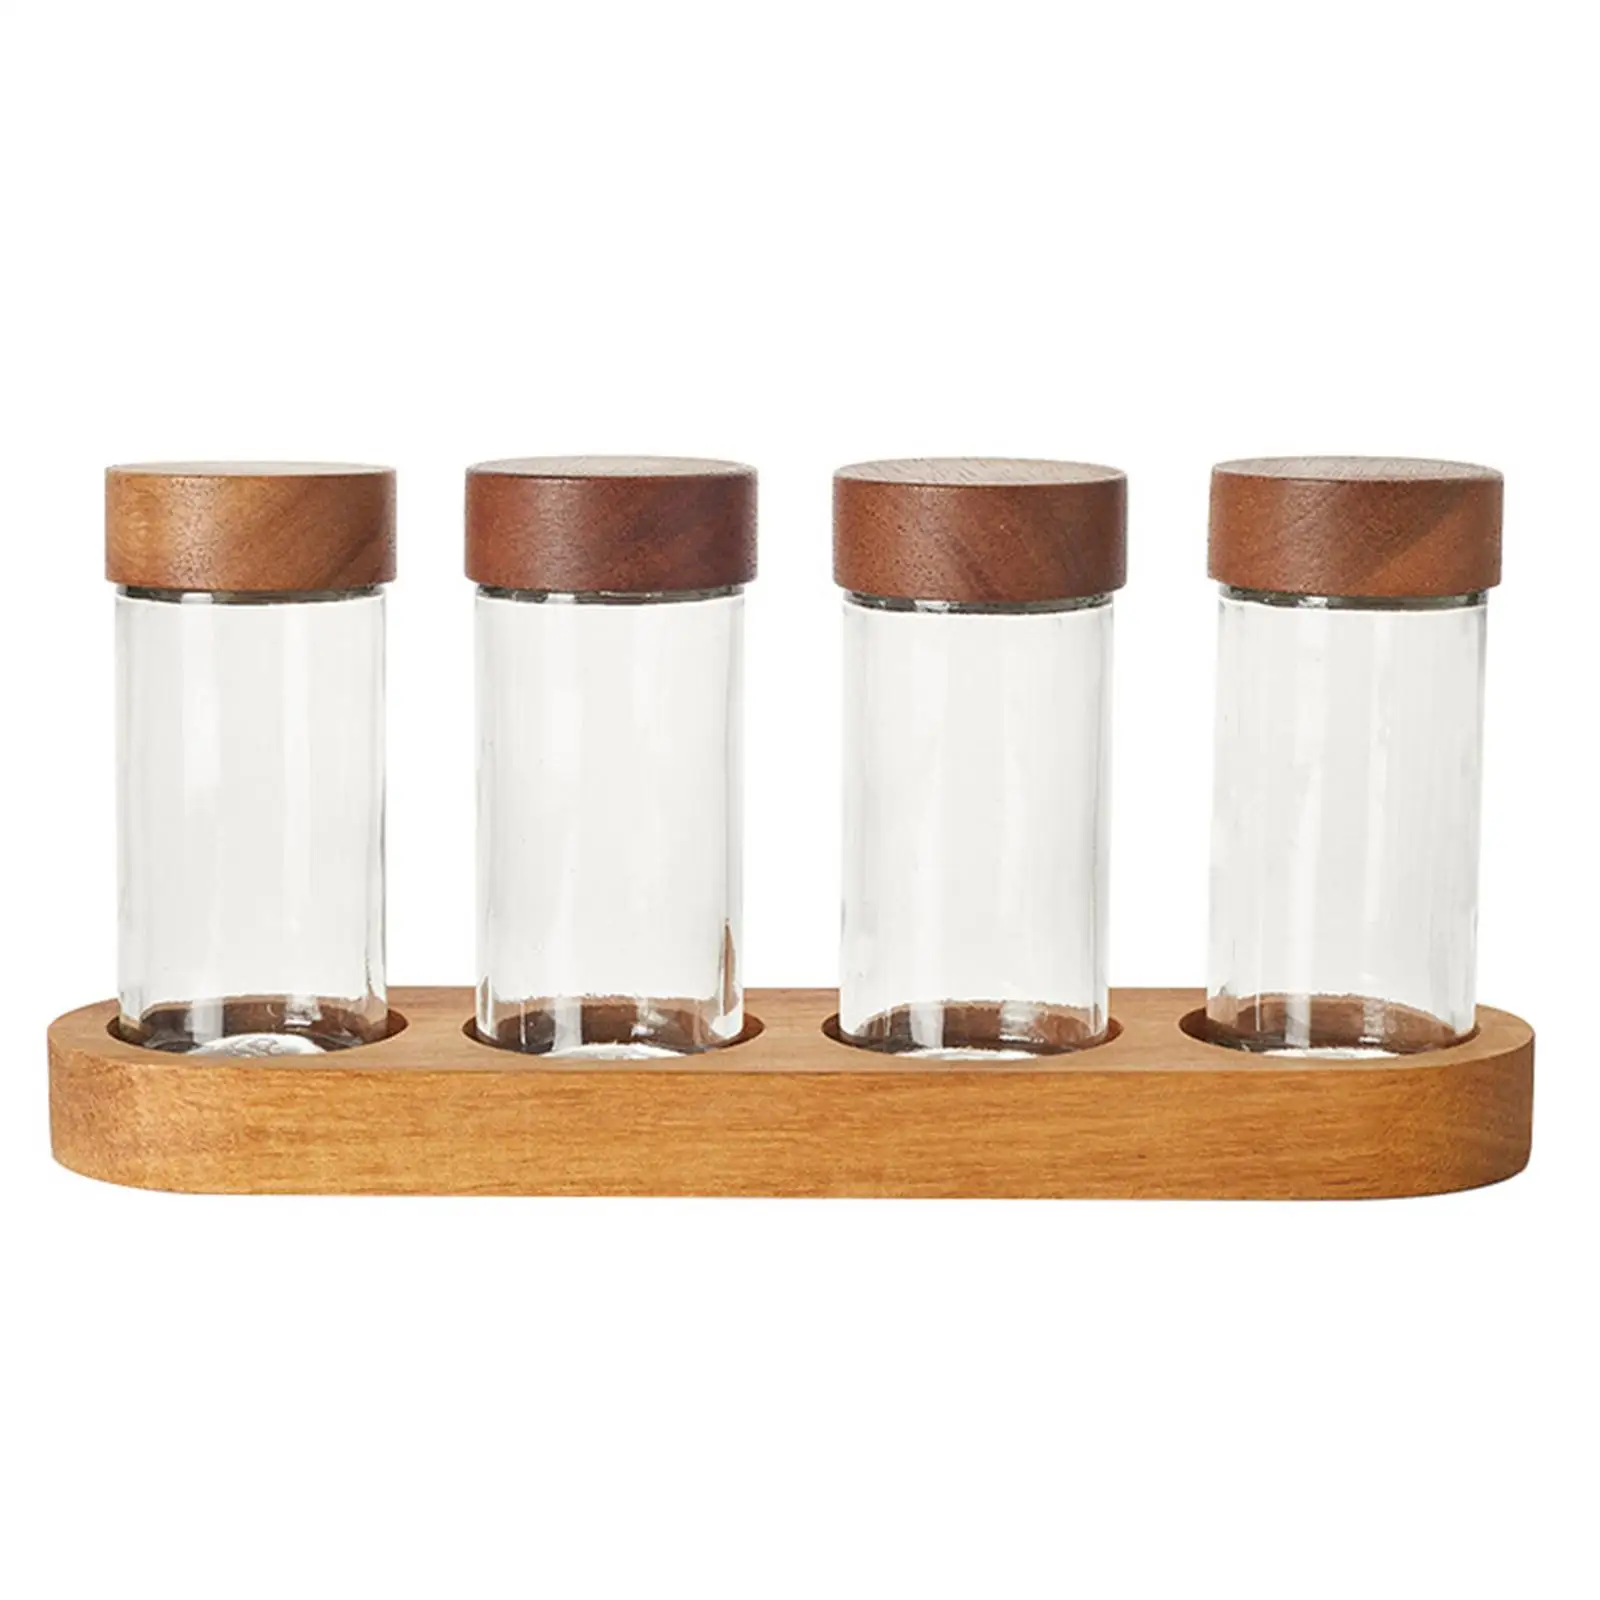 4x Condiment Jars Set Multipurpose with Lid and Tray Sugar Bowl Glass Spice Jars for Tea Pepper Coffee Beans Nuts Spice